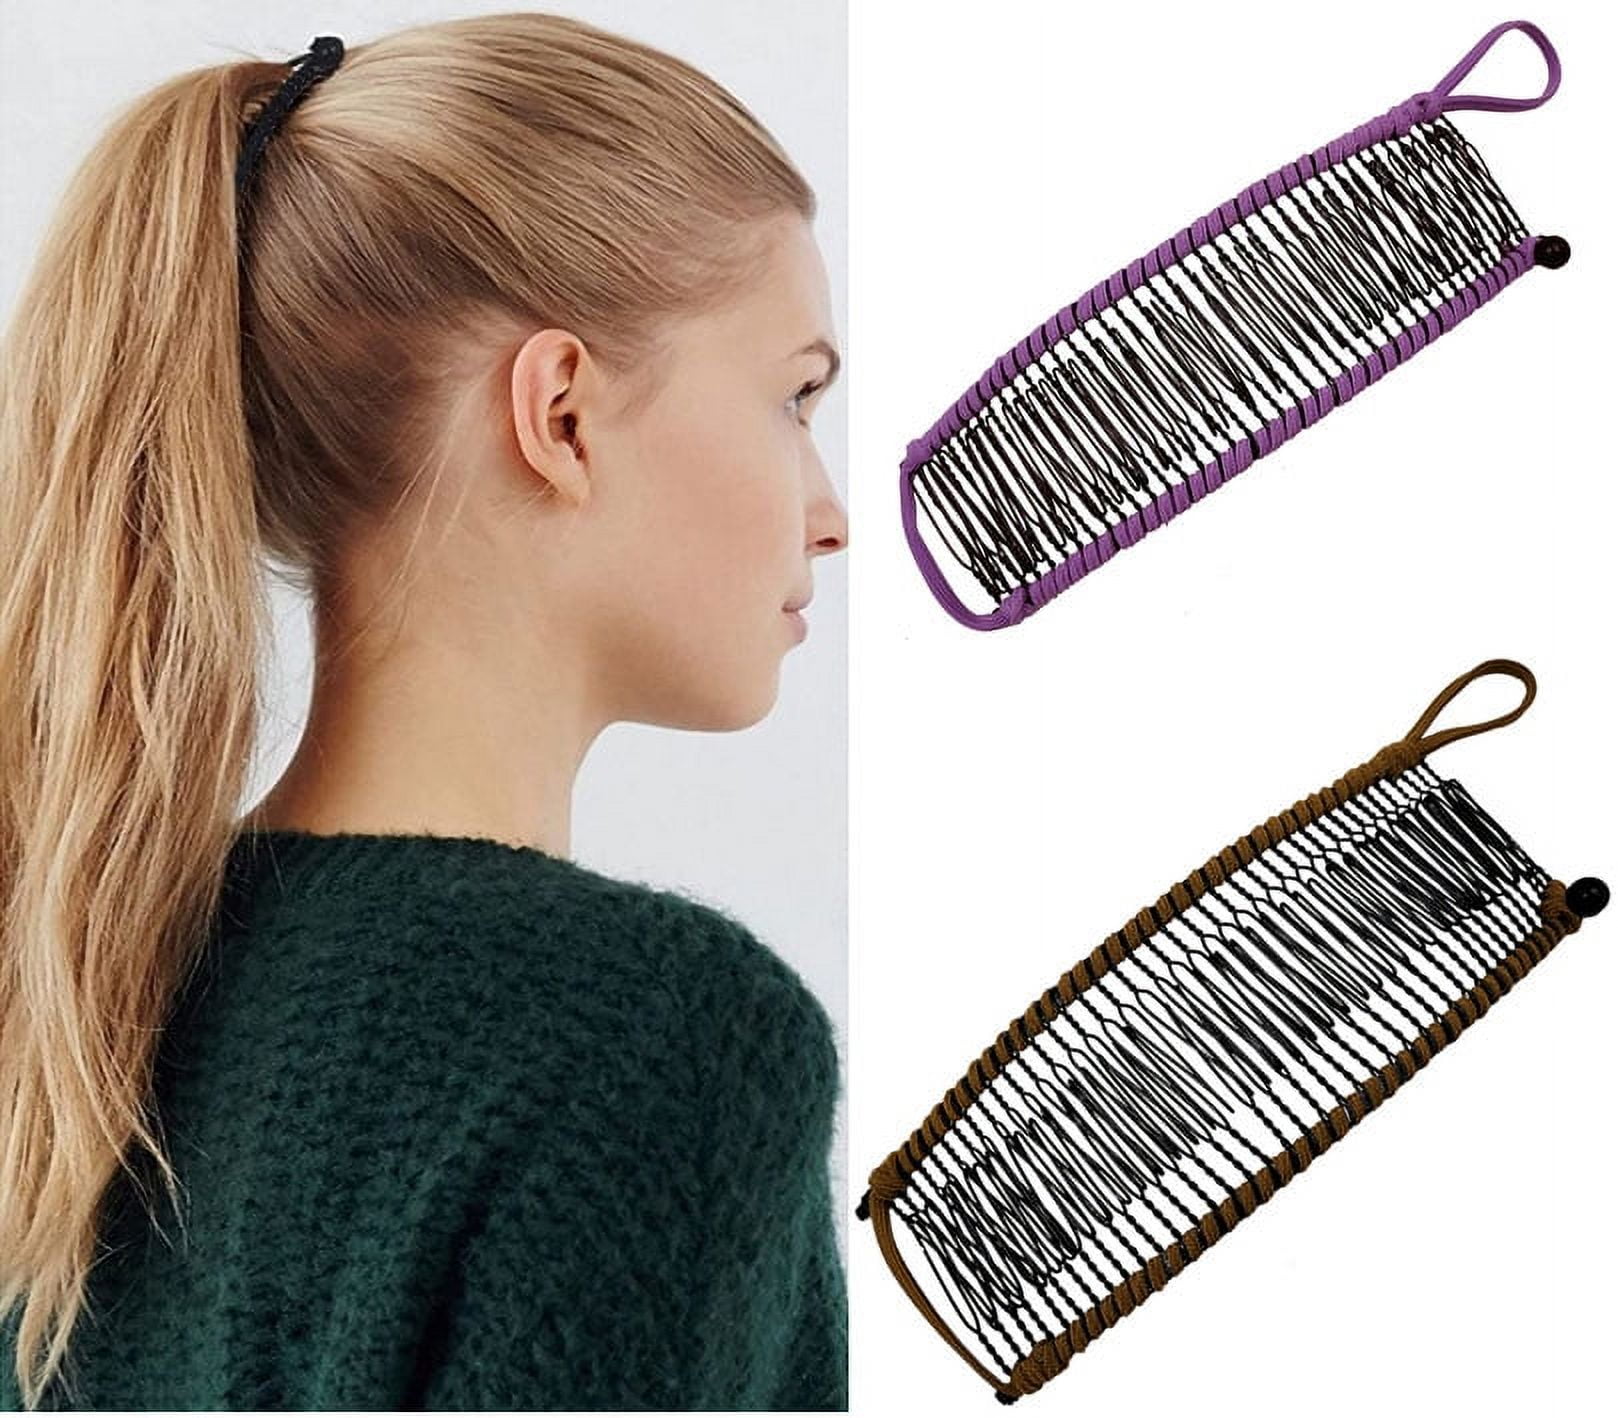 Banana Hair Clips Vintage Clincher Combs Tool for Thick Curly Hair  Accessories Combs Double Banana Clip Set for Women Girls Style A